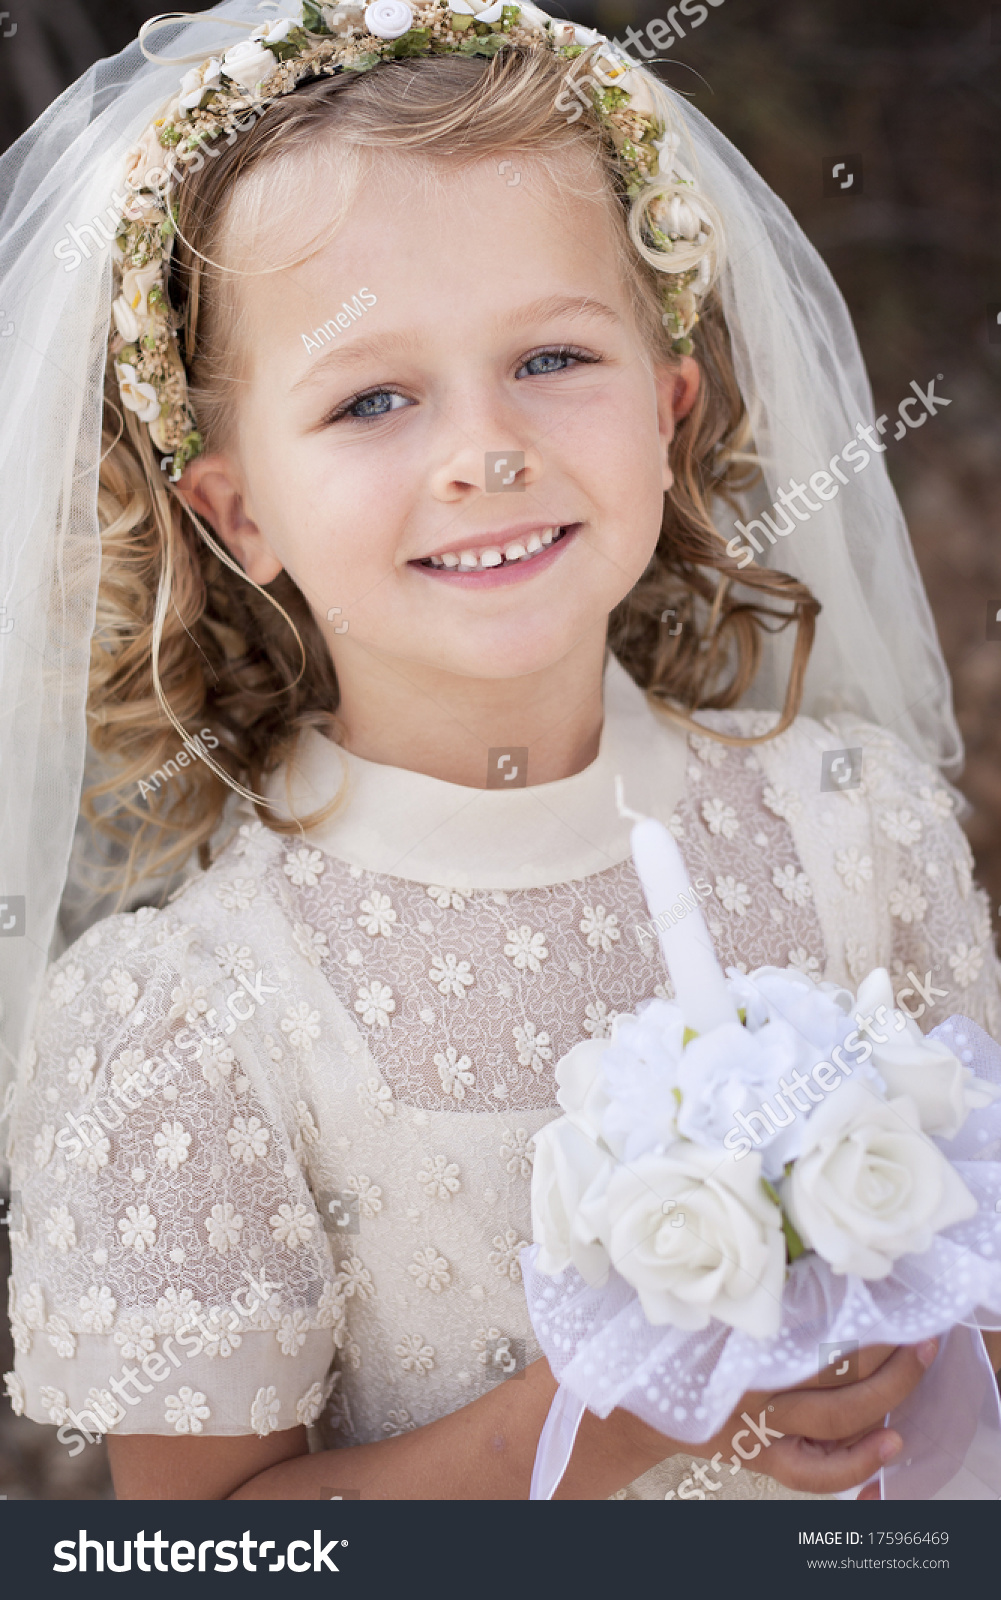 A Young Child Doing Her First Holy Communion Stock Photo 175966469 ...